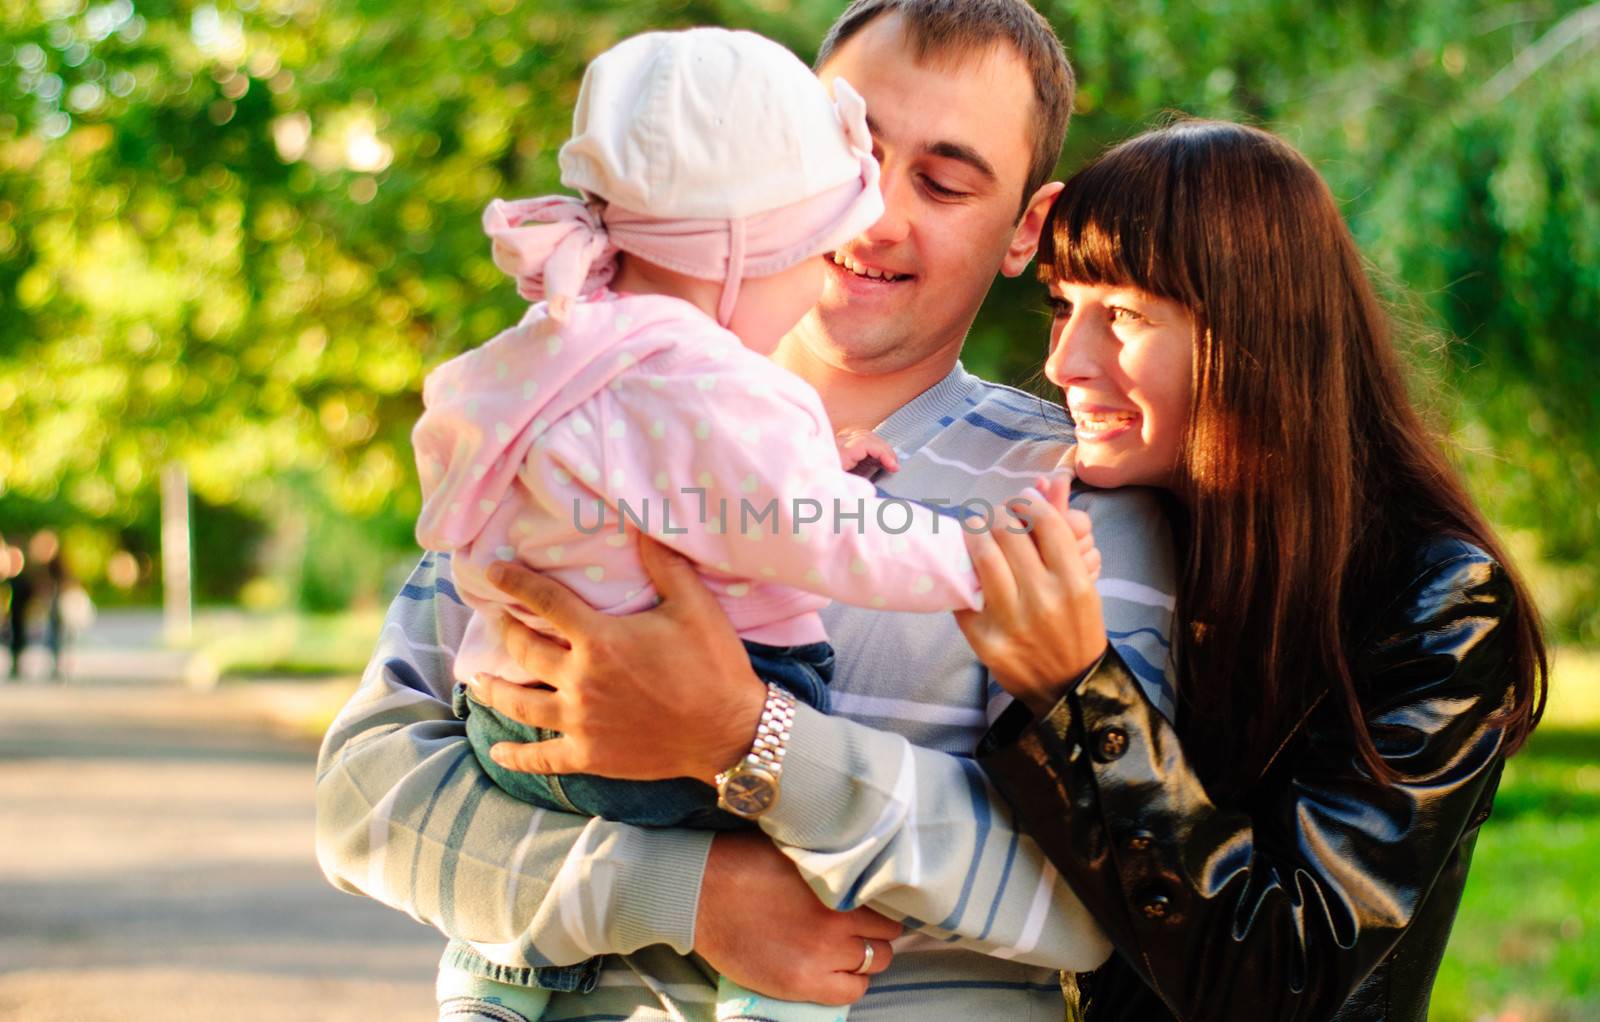 Happy family outdoor - mother, father and daughter are smiling